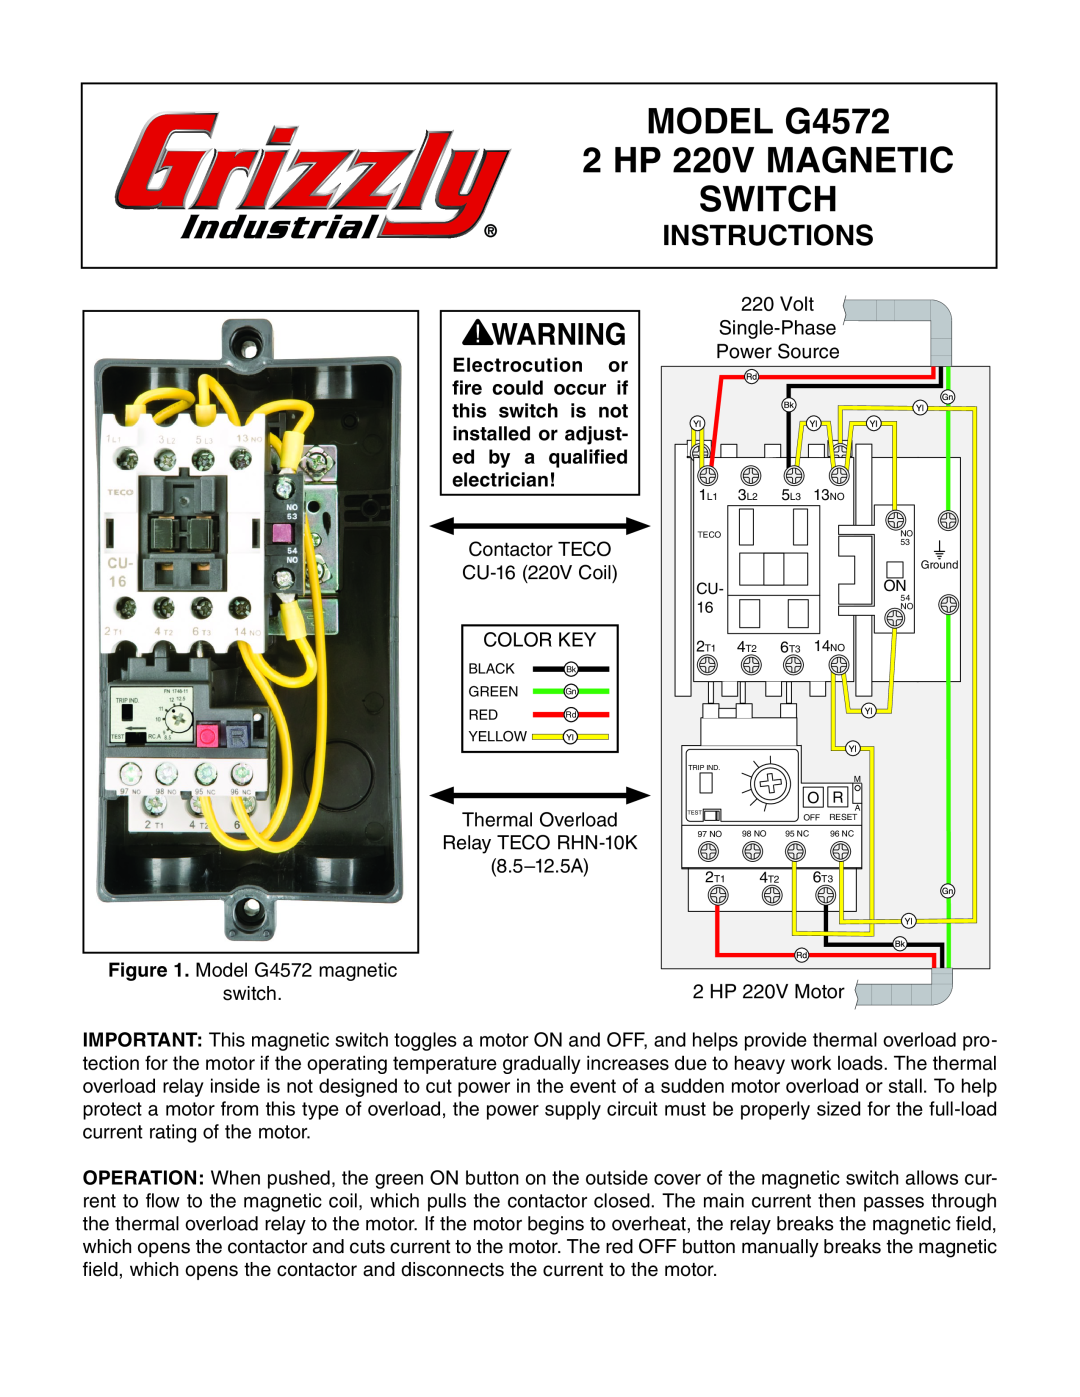 Grizzly manual MODEL G4572 2 HP 220V MAGNETIC SWITCH, Instructions 